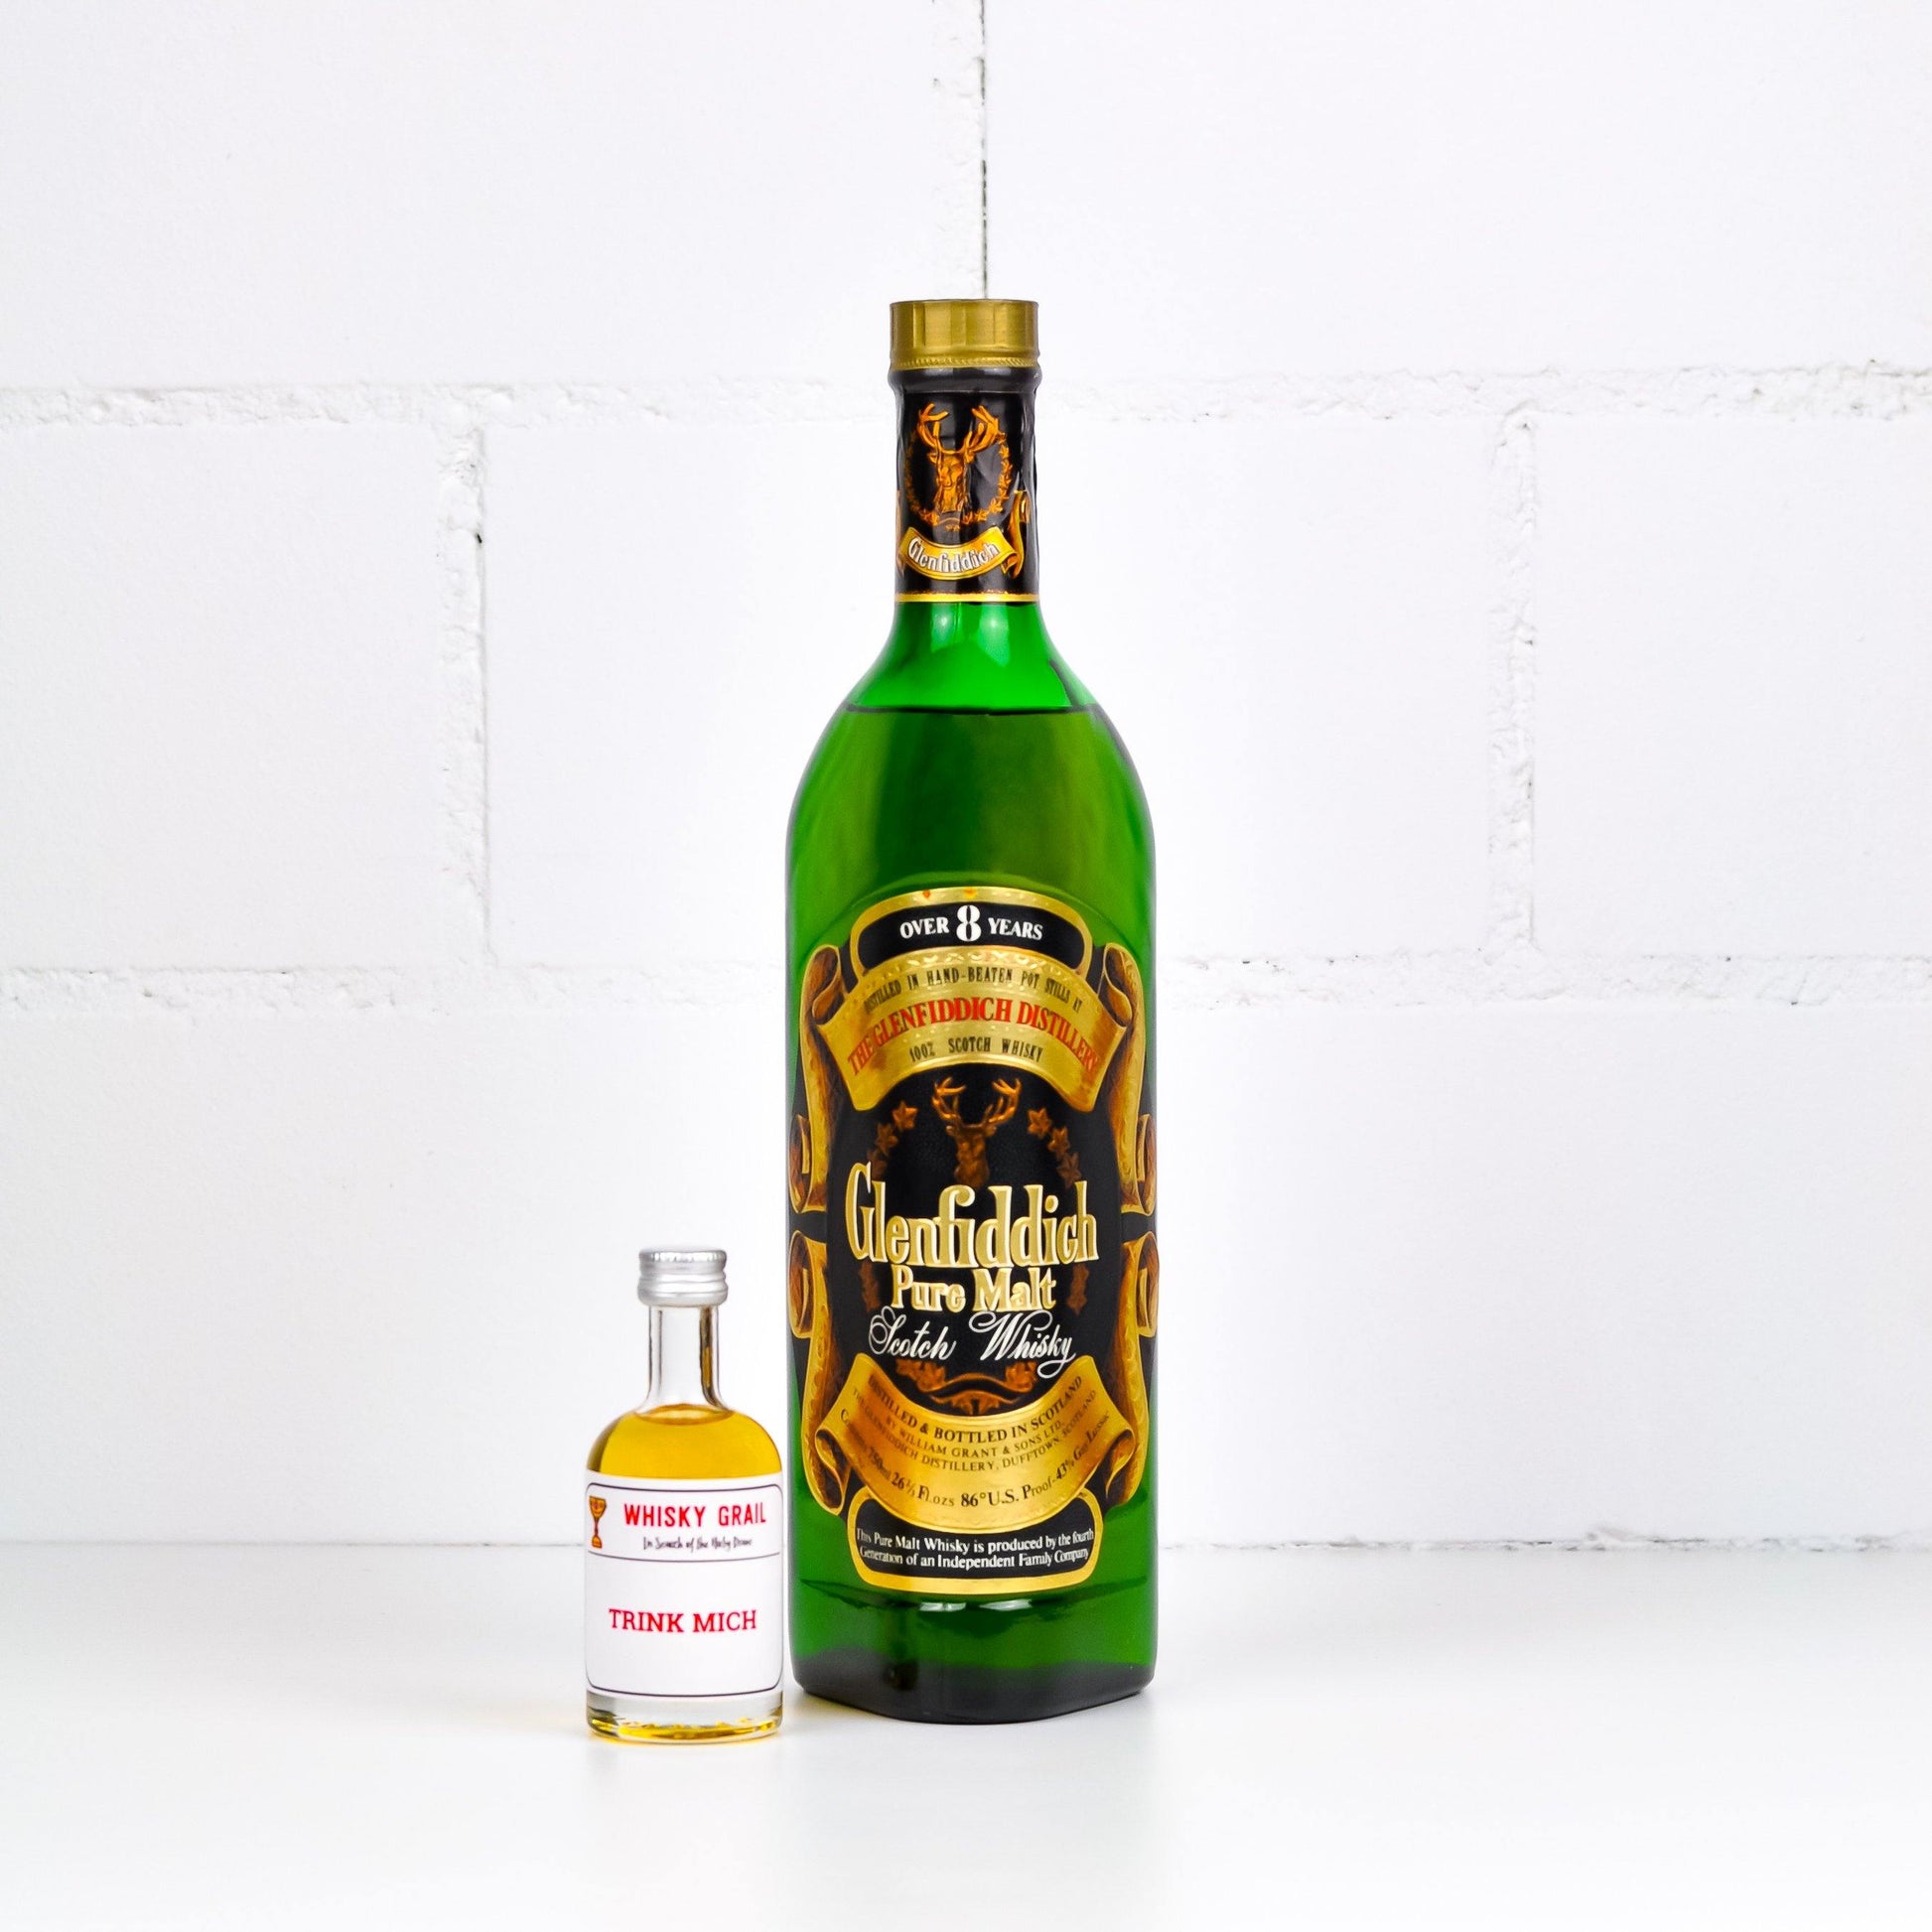 Glenfiddich Pure Malt<br>Over 8 Years 90s<br>5cl - Whisky Grail